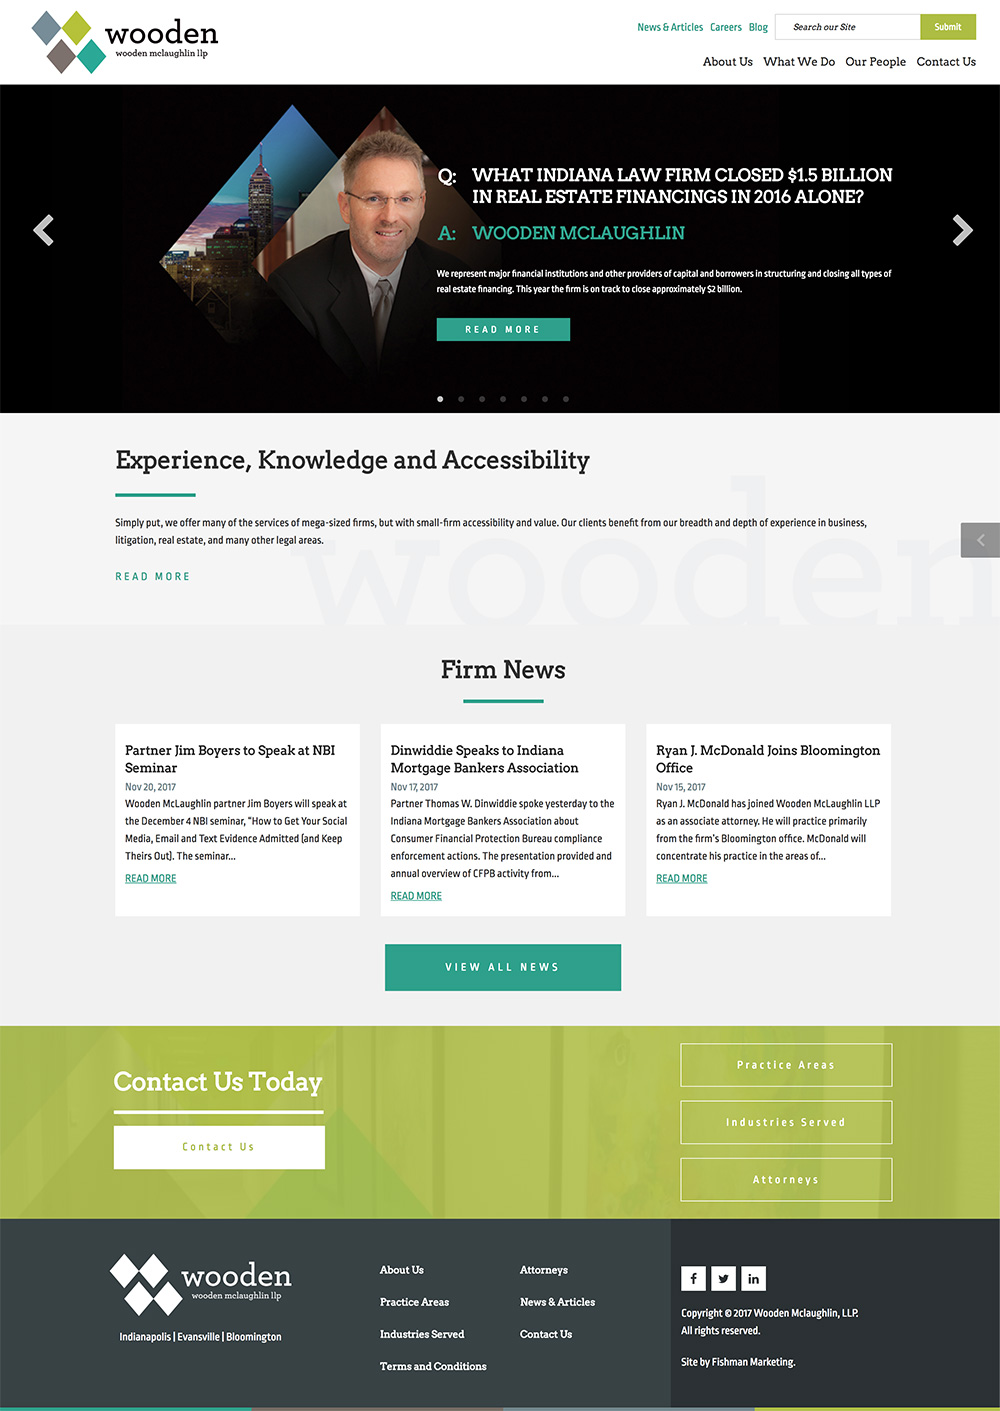 Homepage for the Wooden Lawyers website